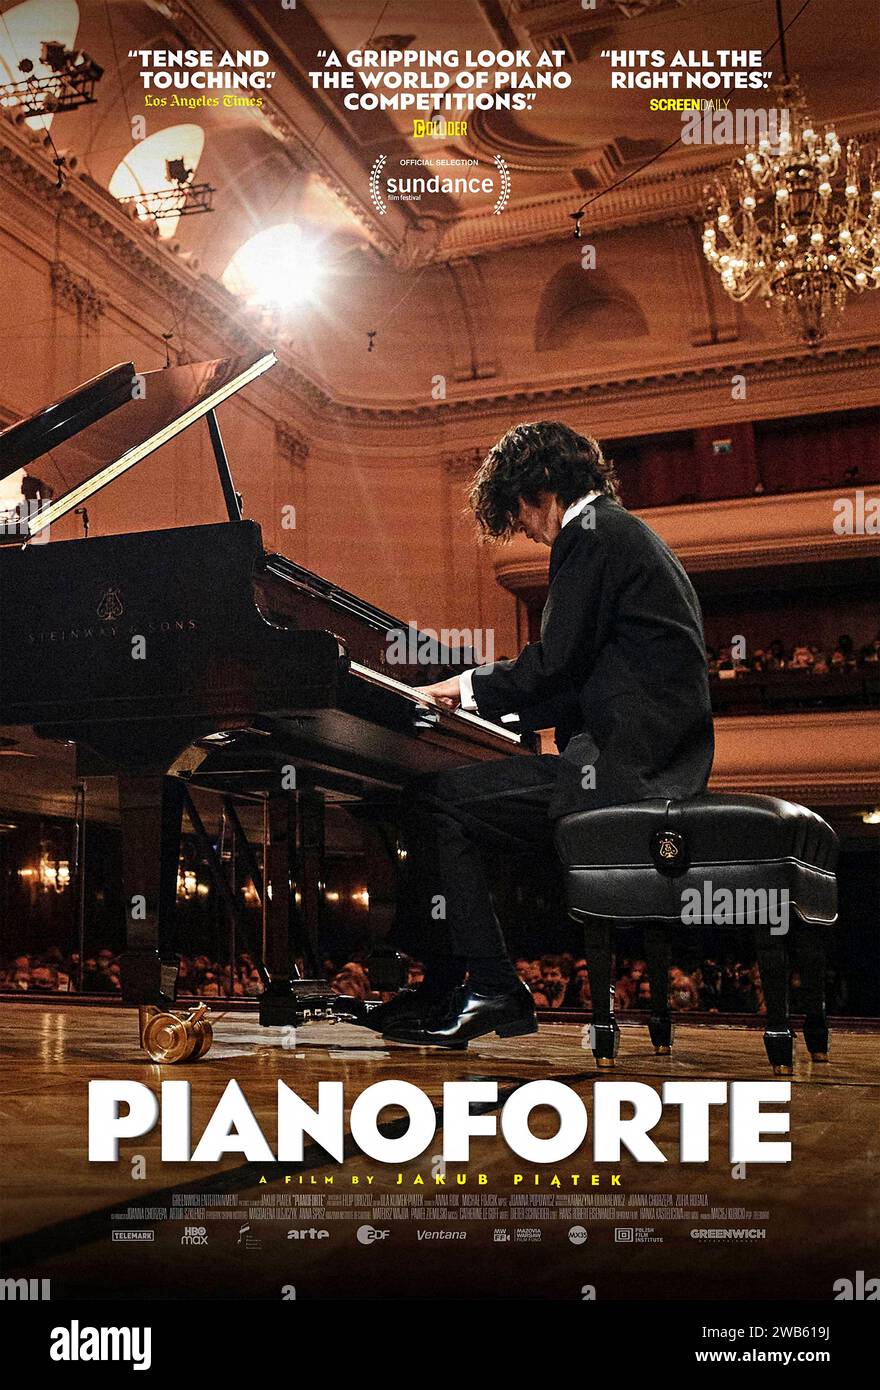 Pianoforte (2023) directed by Jakub Piatek and starring . Young pianists take part in the legendary International Chopin Piano Competition. A unique chance of a lifetime, portrayed from backstage and set to Chopin's music. US one sheet poster ***EDITORIAL USE ONLY***. Credit: BFA / Greenwich Entertainment Stock Photo